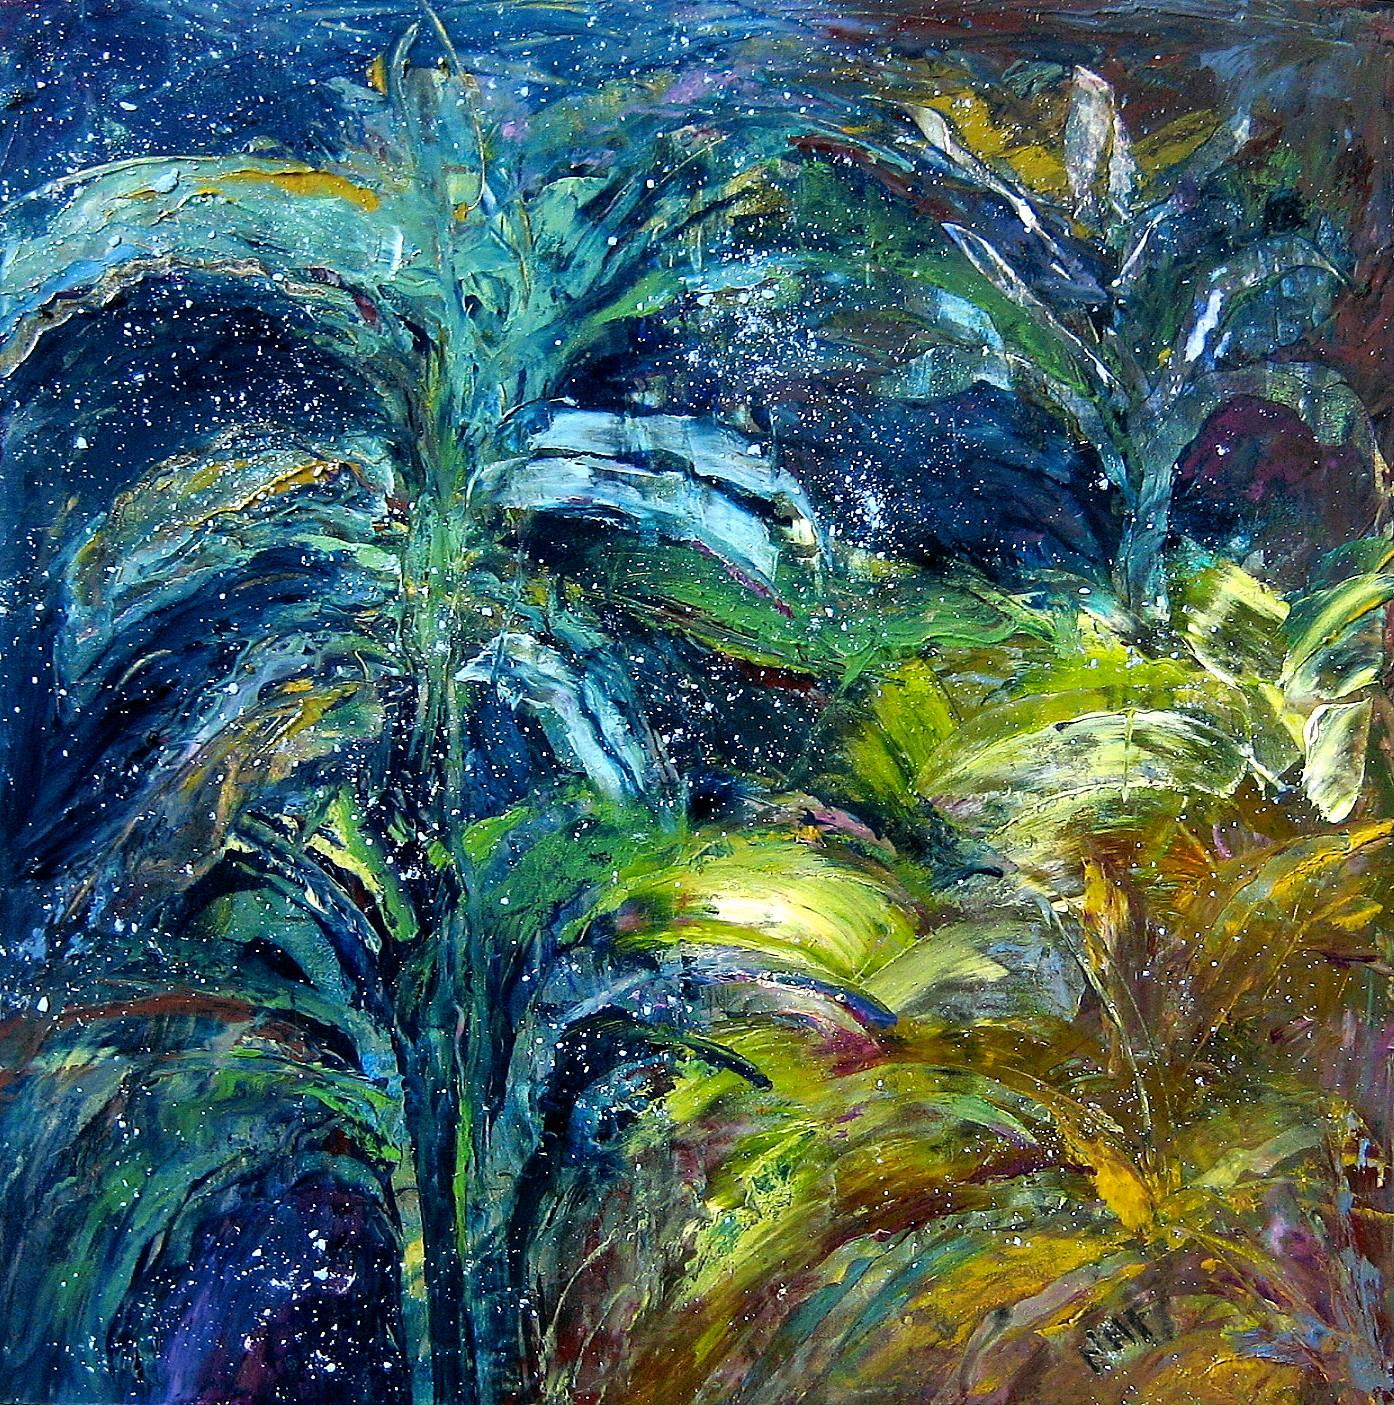 "Stars Above the Garden", expressionist, blues, greens, yellows, oil painting